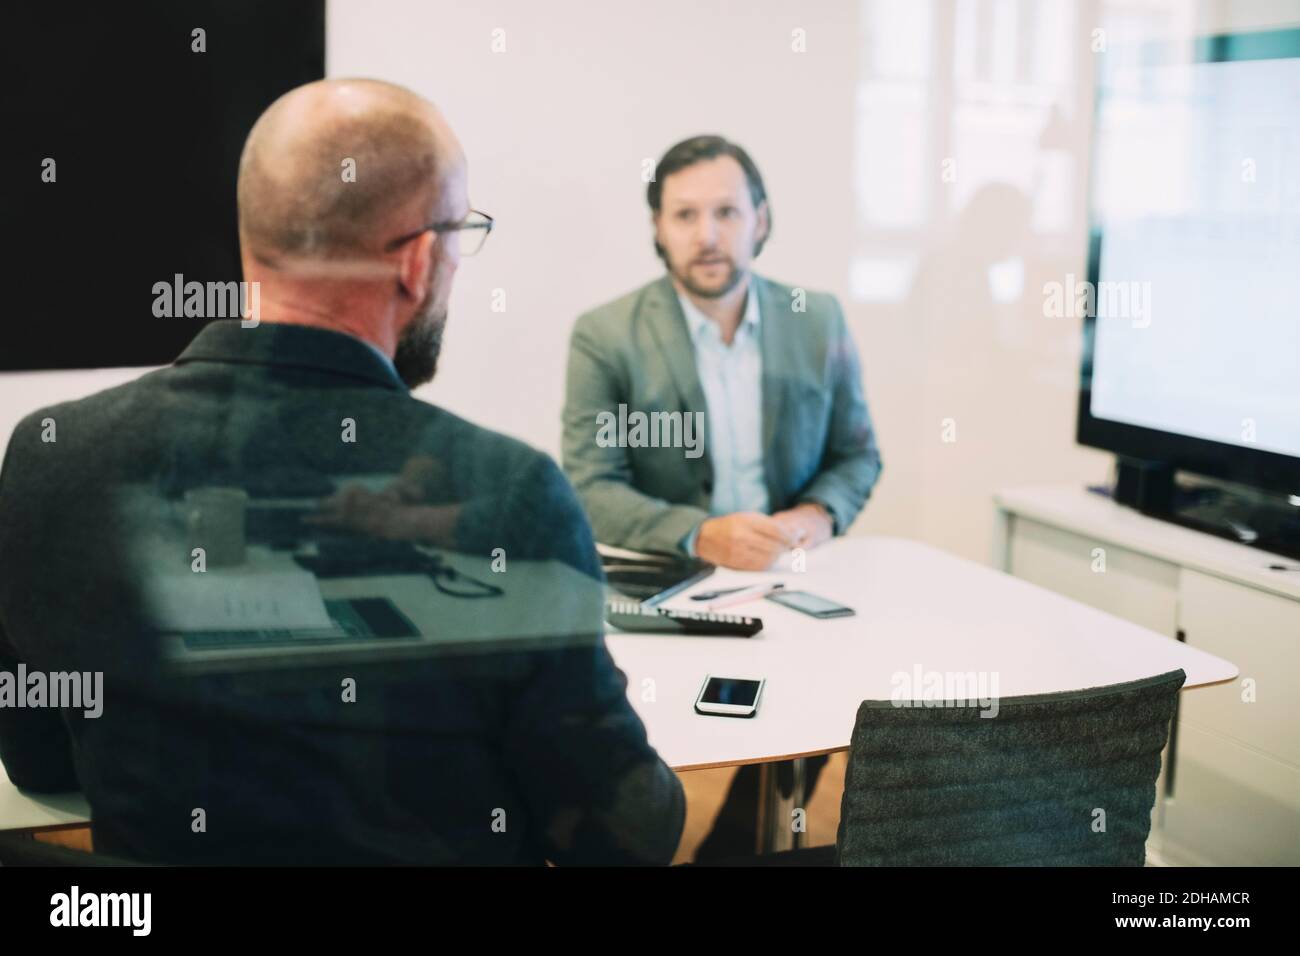 Business colleagues discussing in meeting seen through glass at office Stock Photo